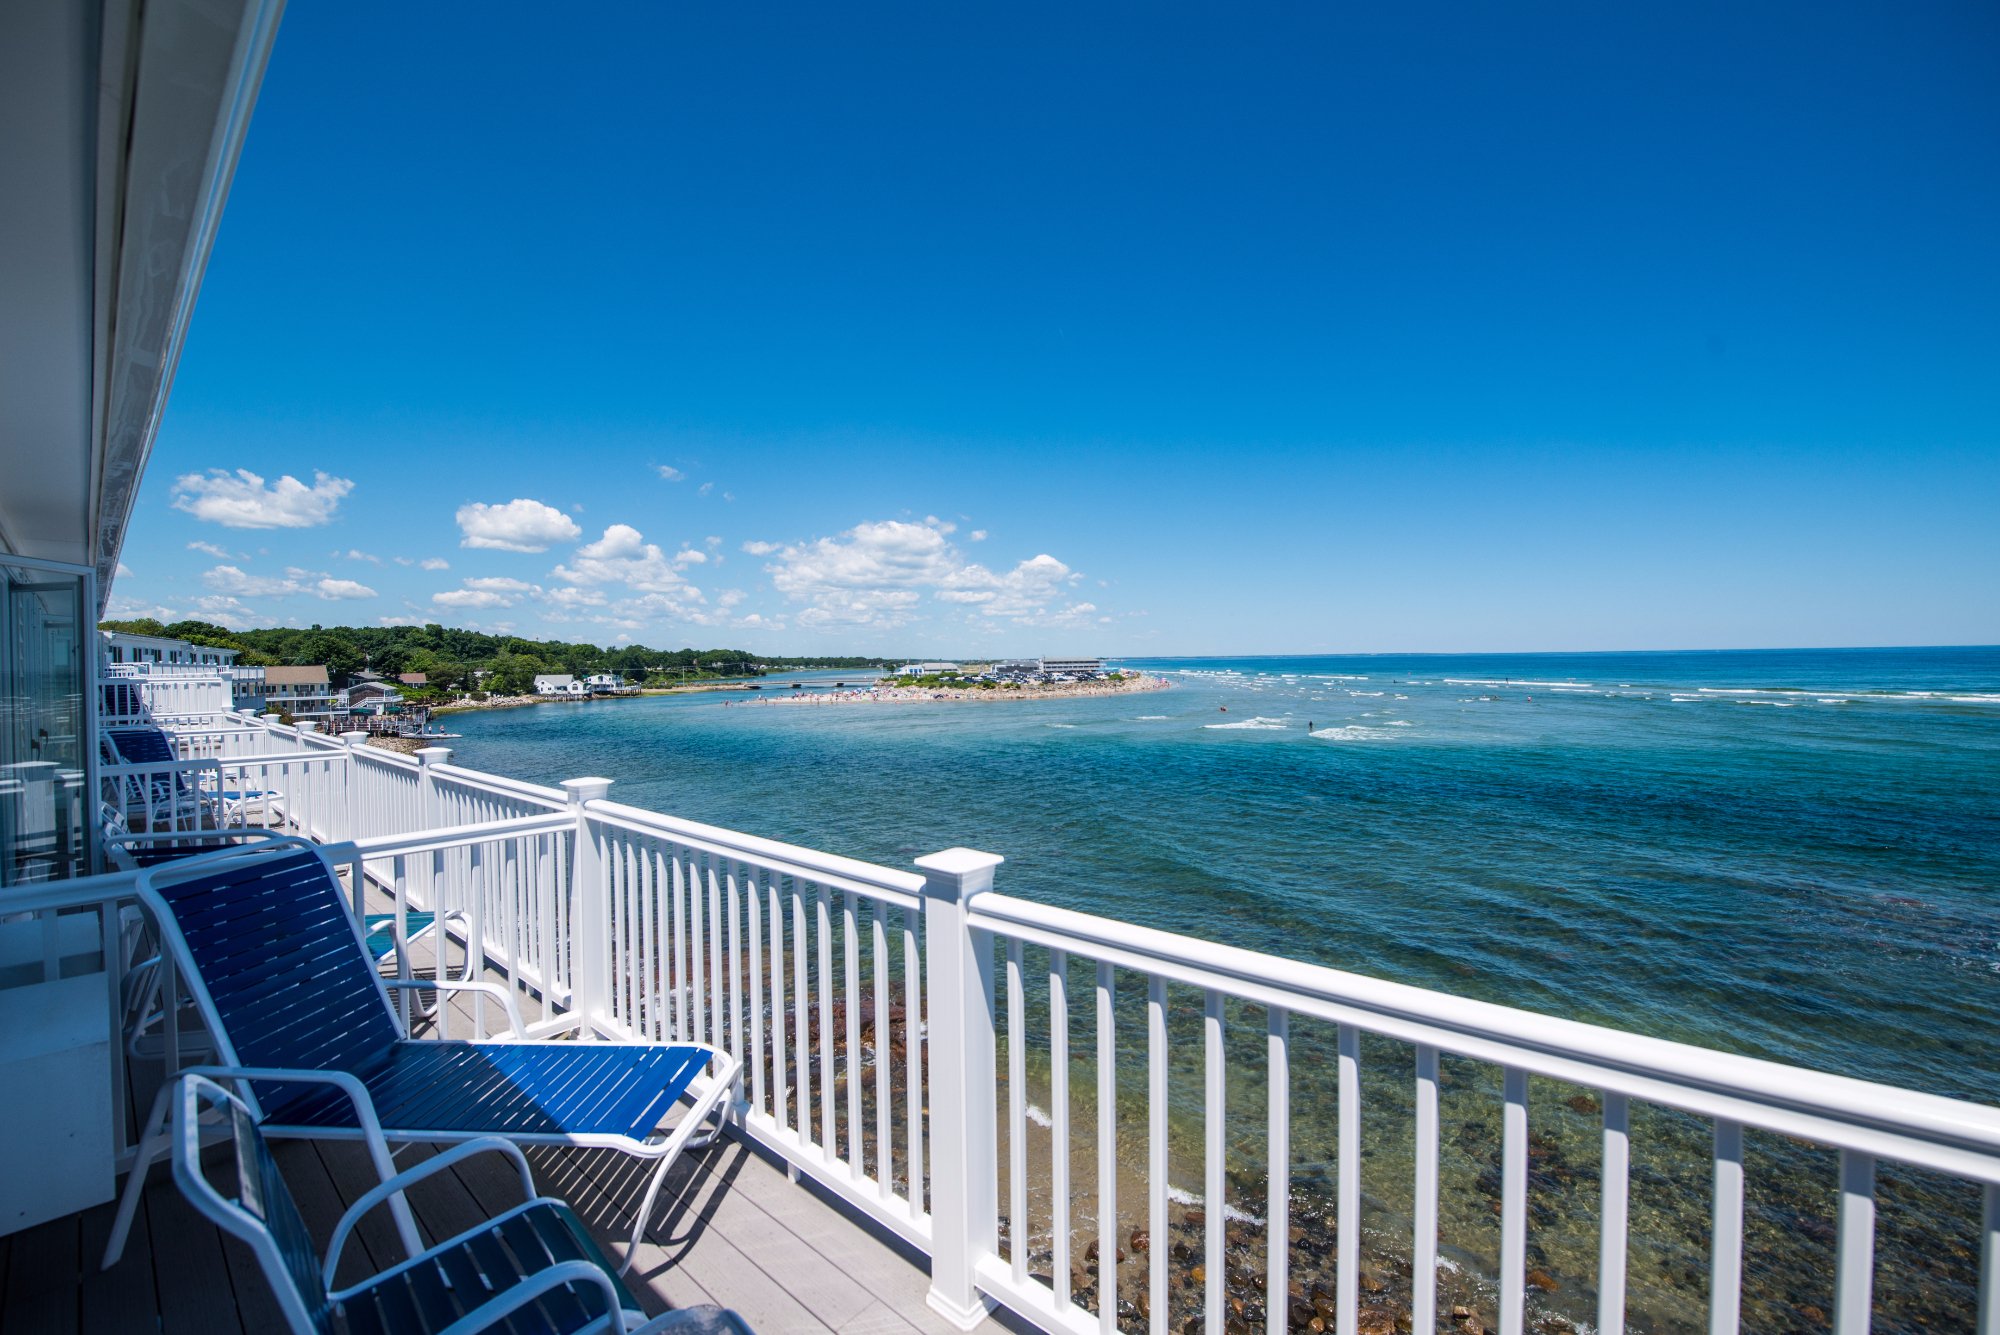 The Sparhawk Oceanfront Resort Ogunquit ME What to 